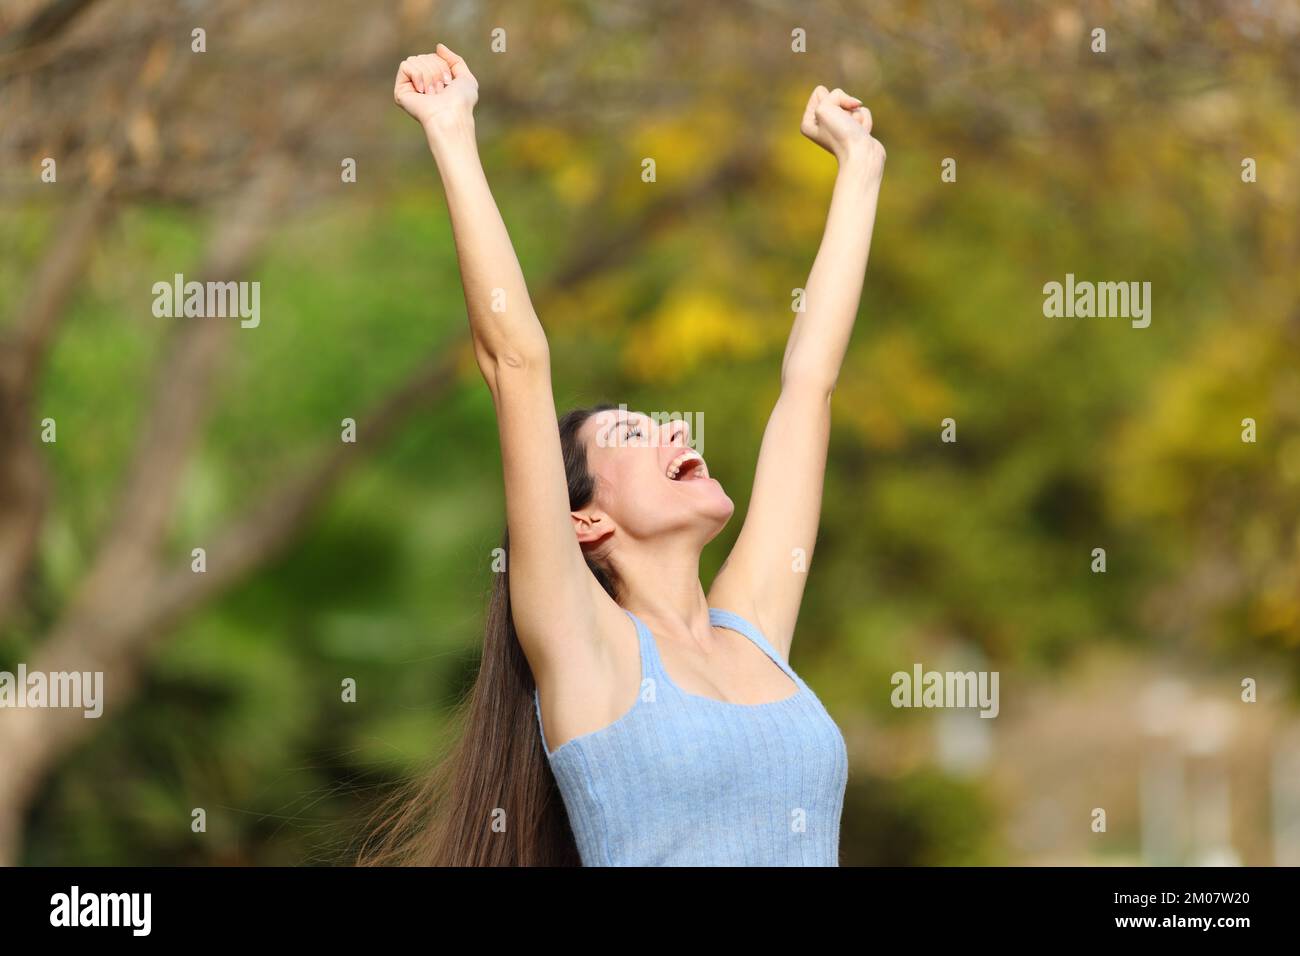 Excited teen raising arms celebrating success in a park Stock Photo